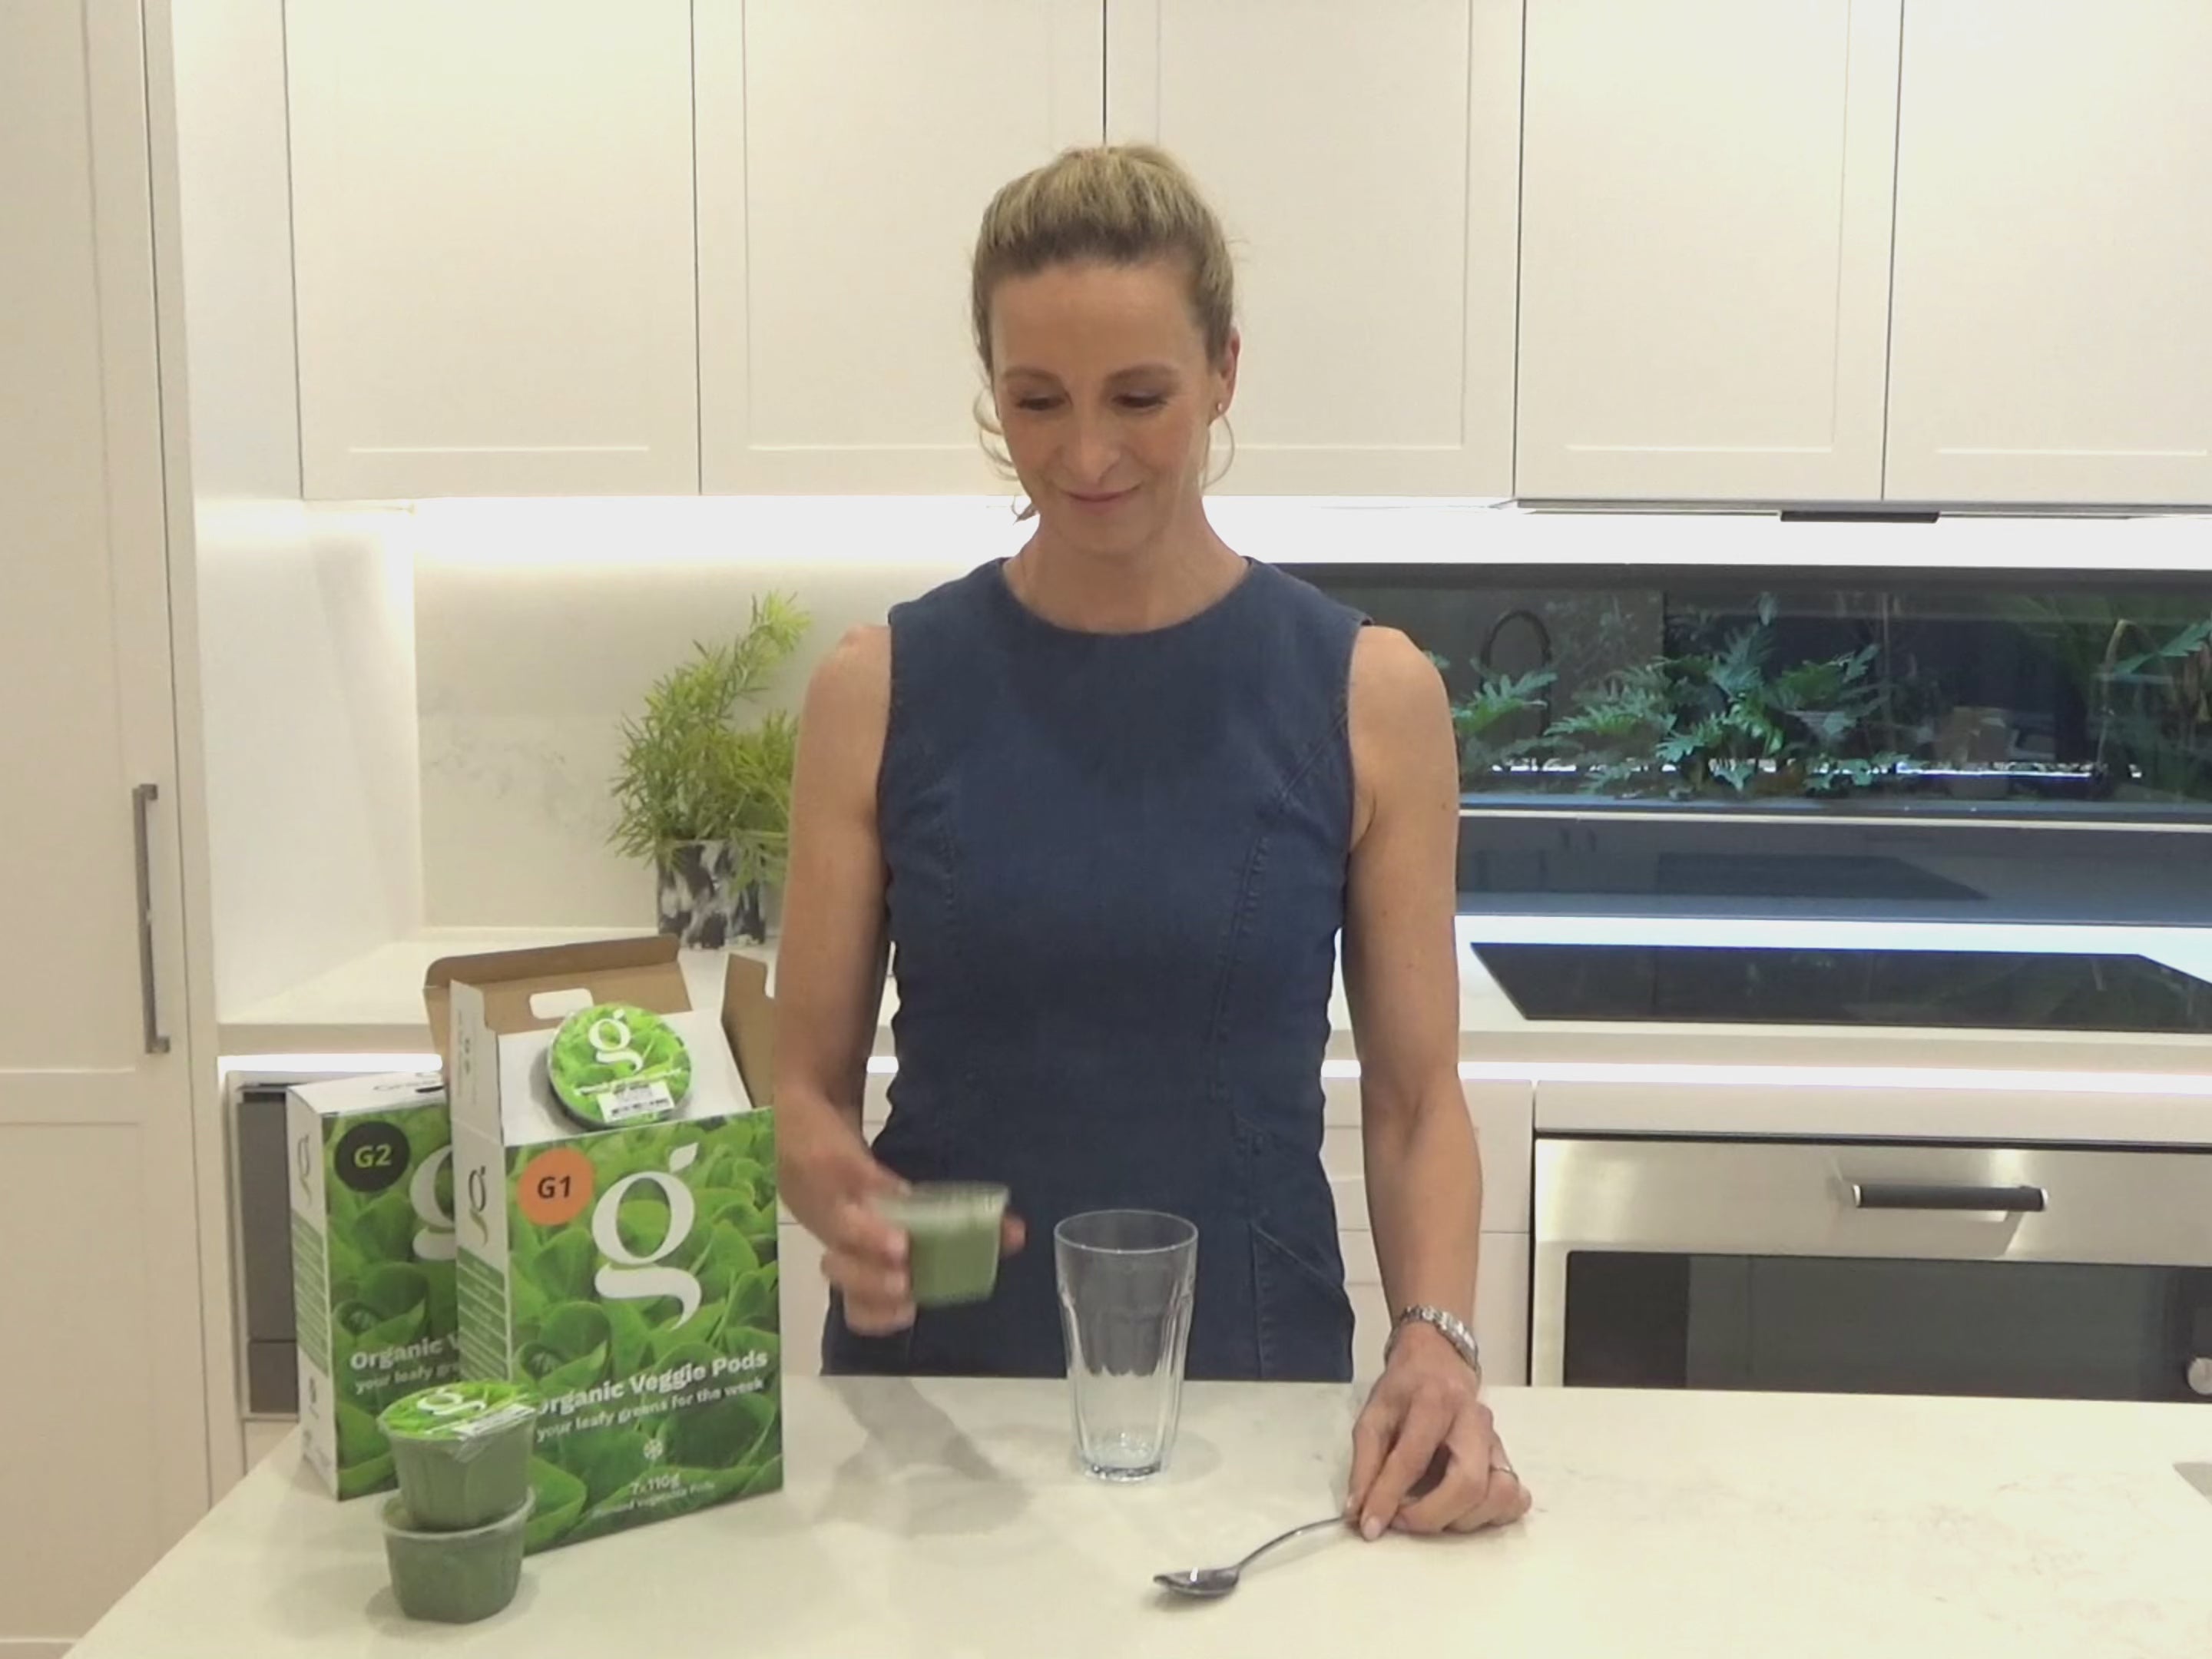 Load video: Demonstration video of how to make a veggie pod with tap water